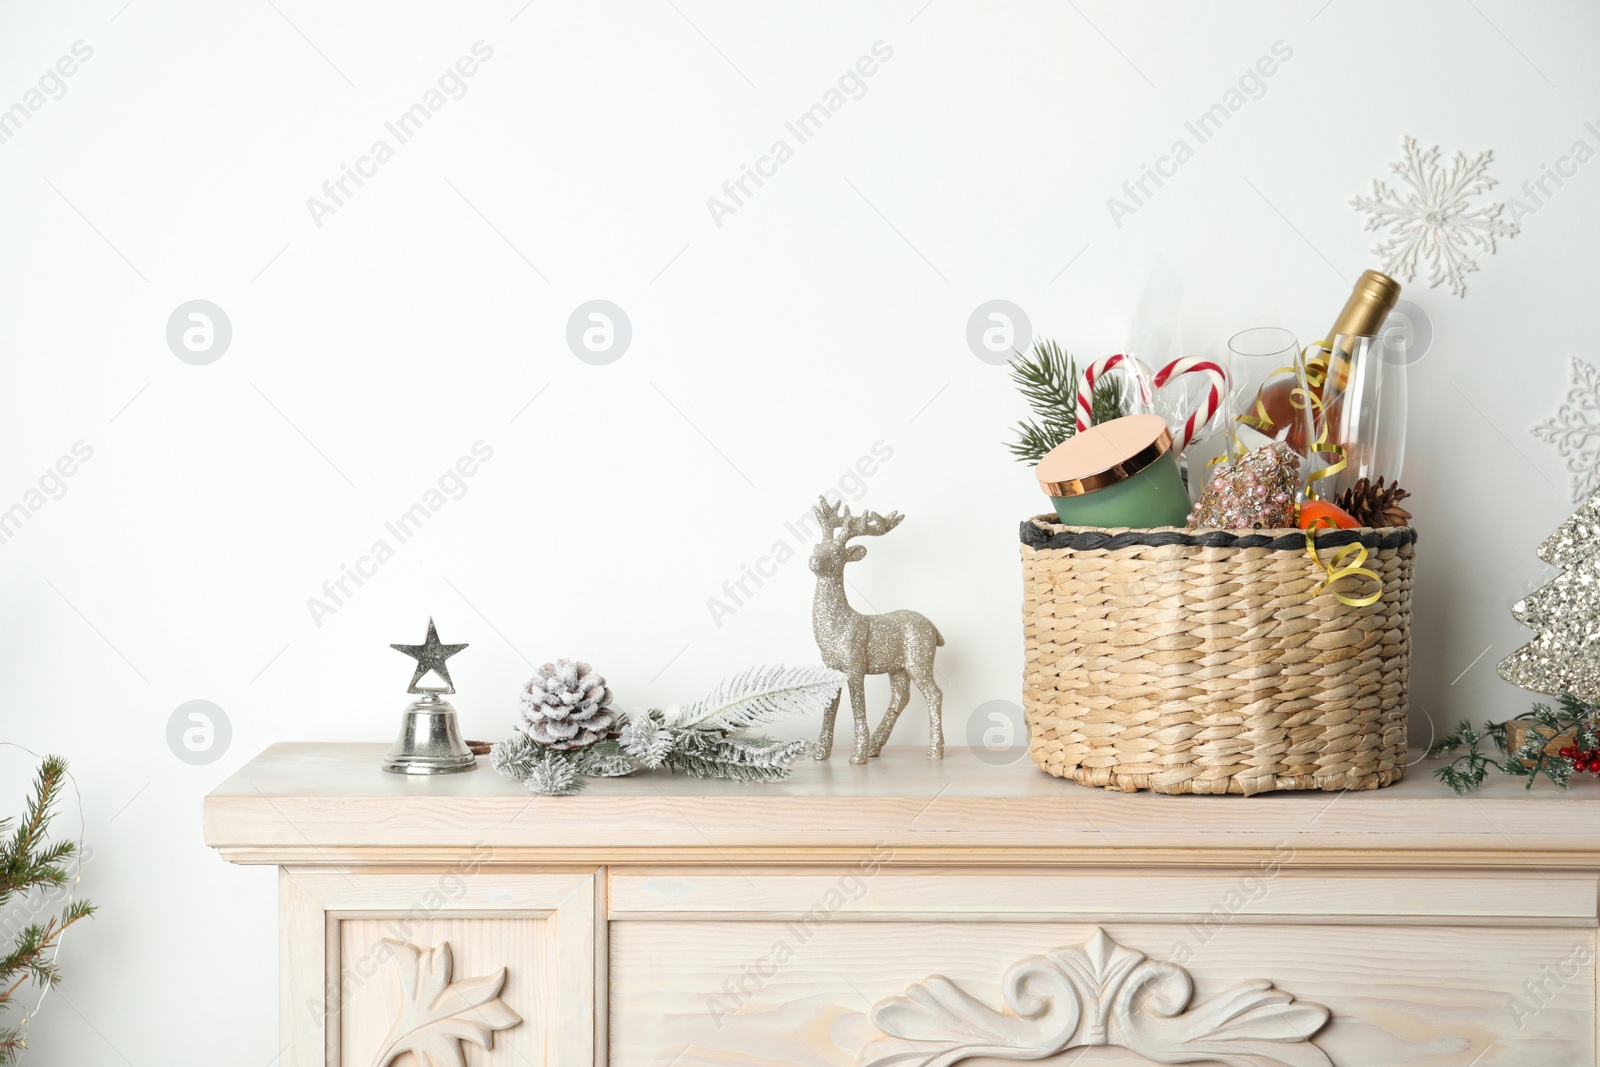 Photo of Wicker basket with gift set and Christmas decor on shelf. Space for text